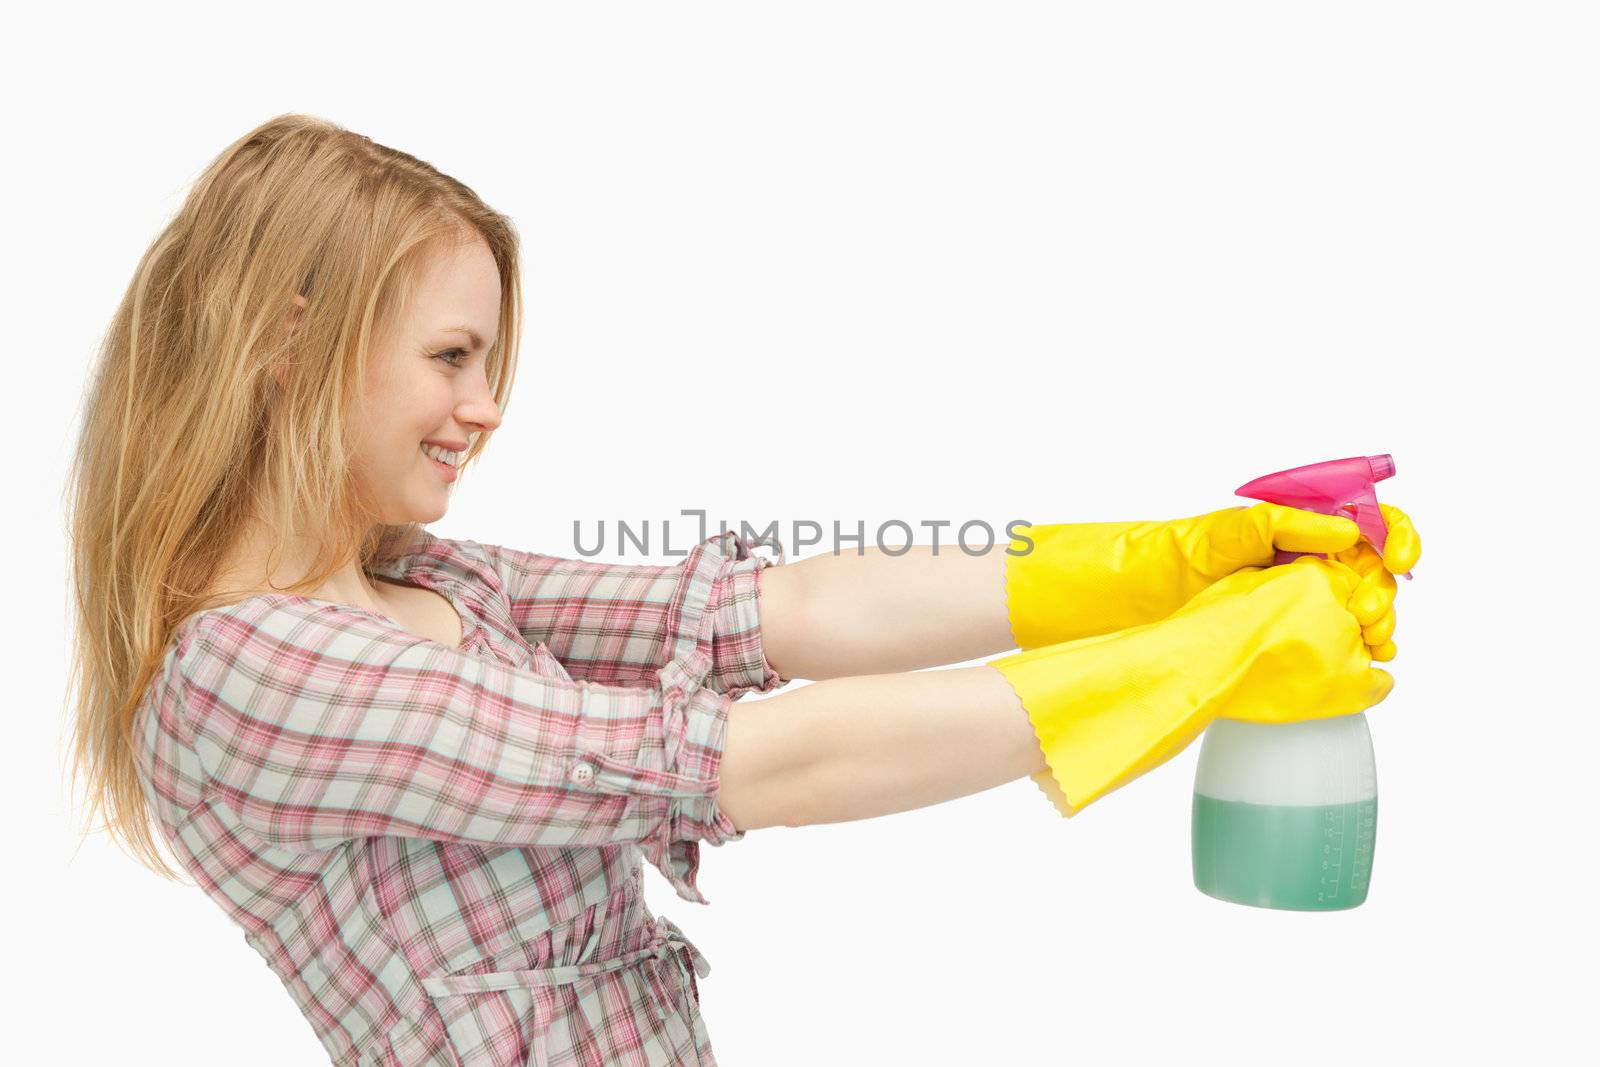 Fair-haired woman holding a spray bottle while smiling against white background